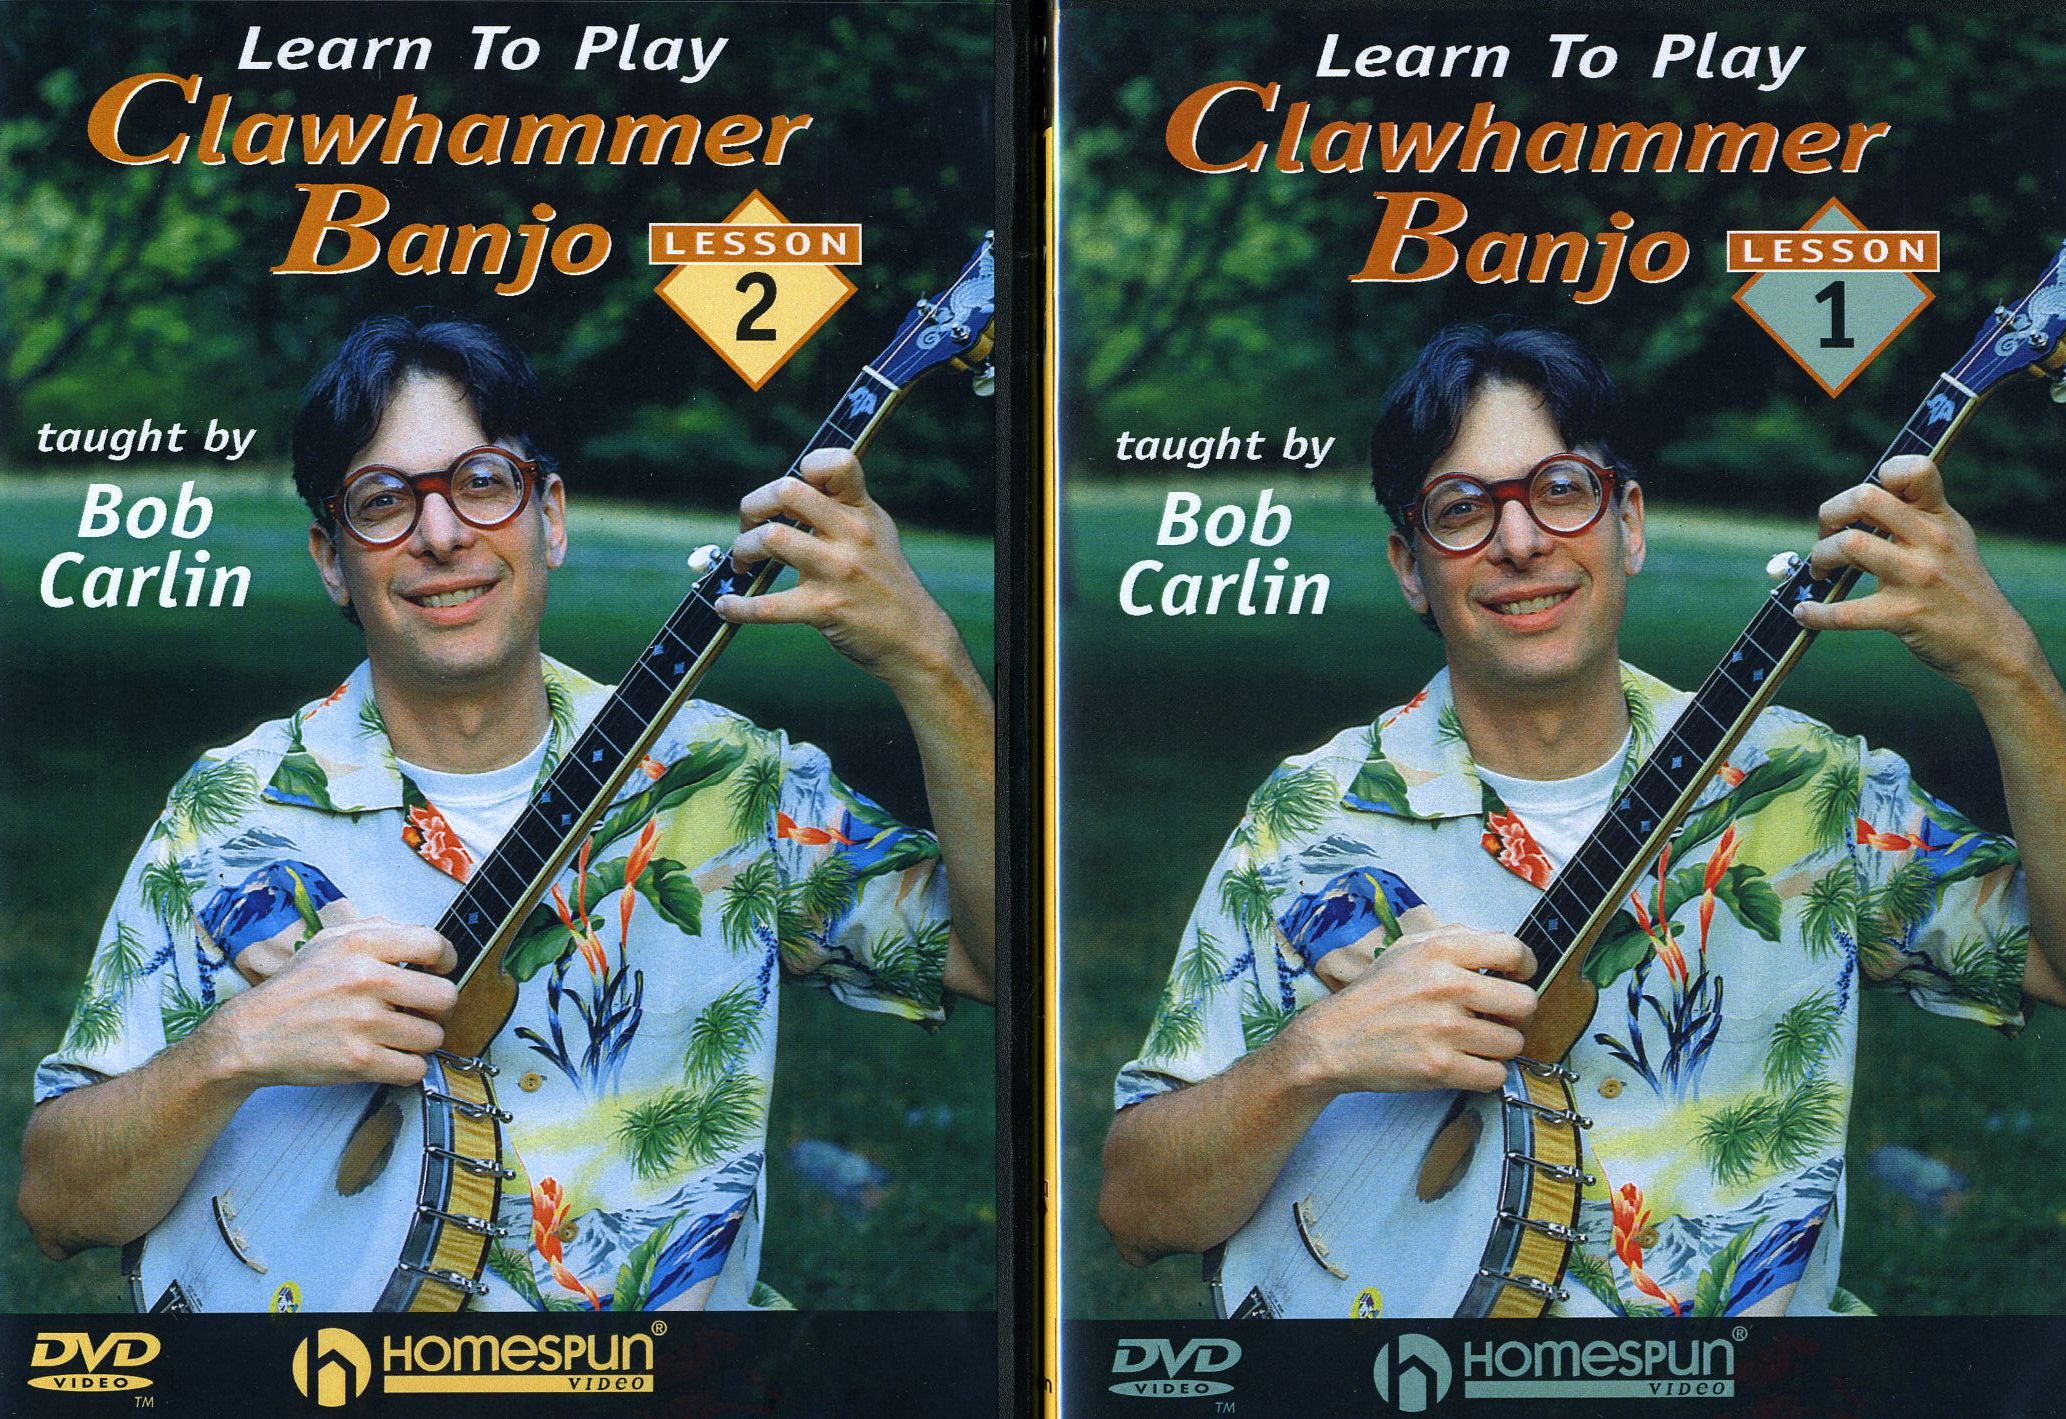 LEARN TO PLAY CLAWHAMMER BANJO (2PC)